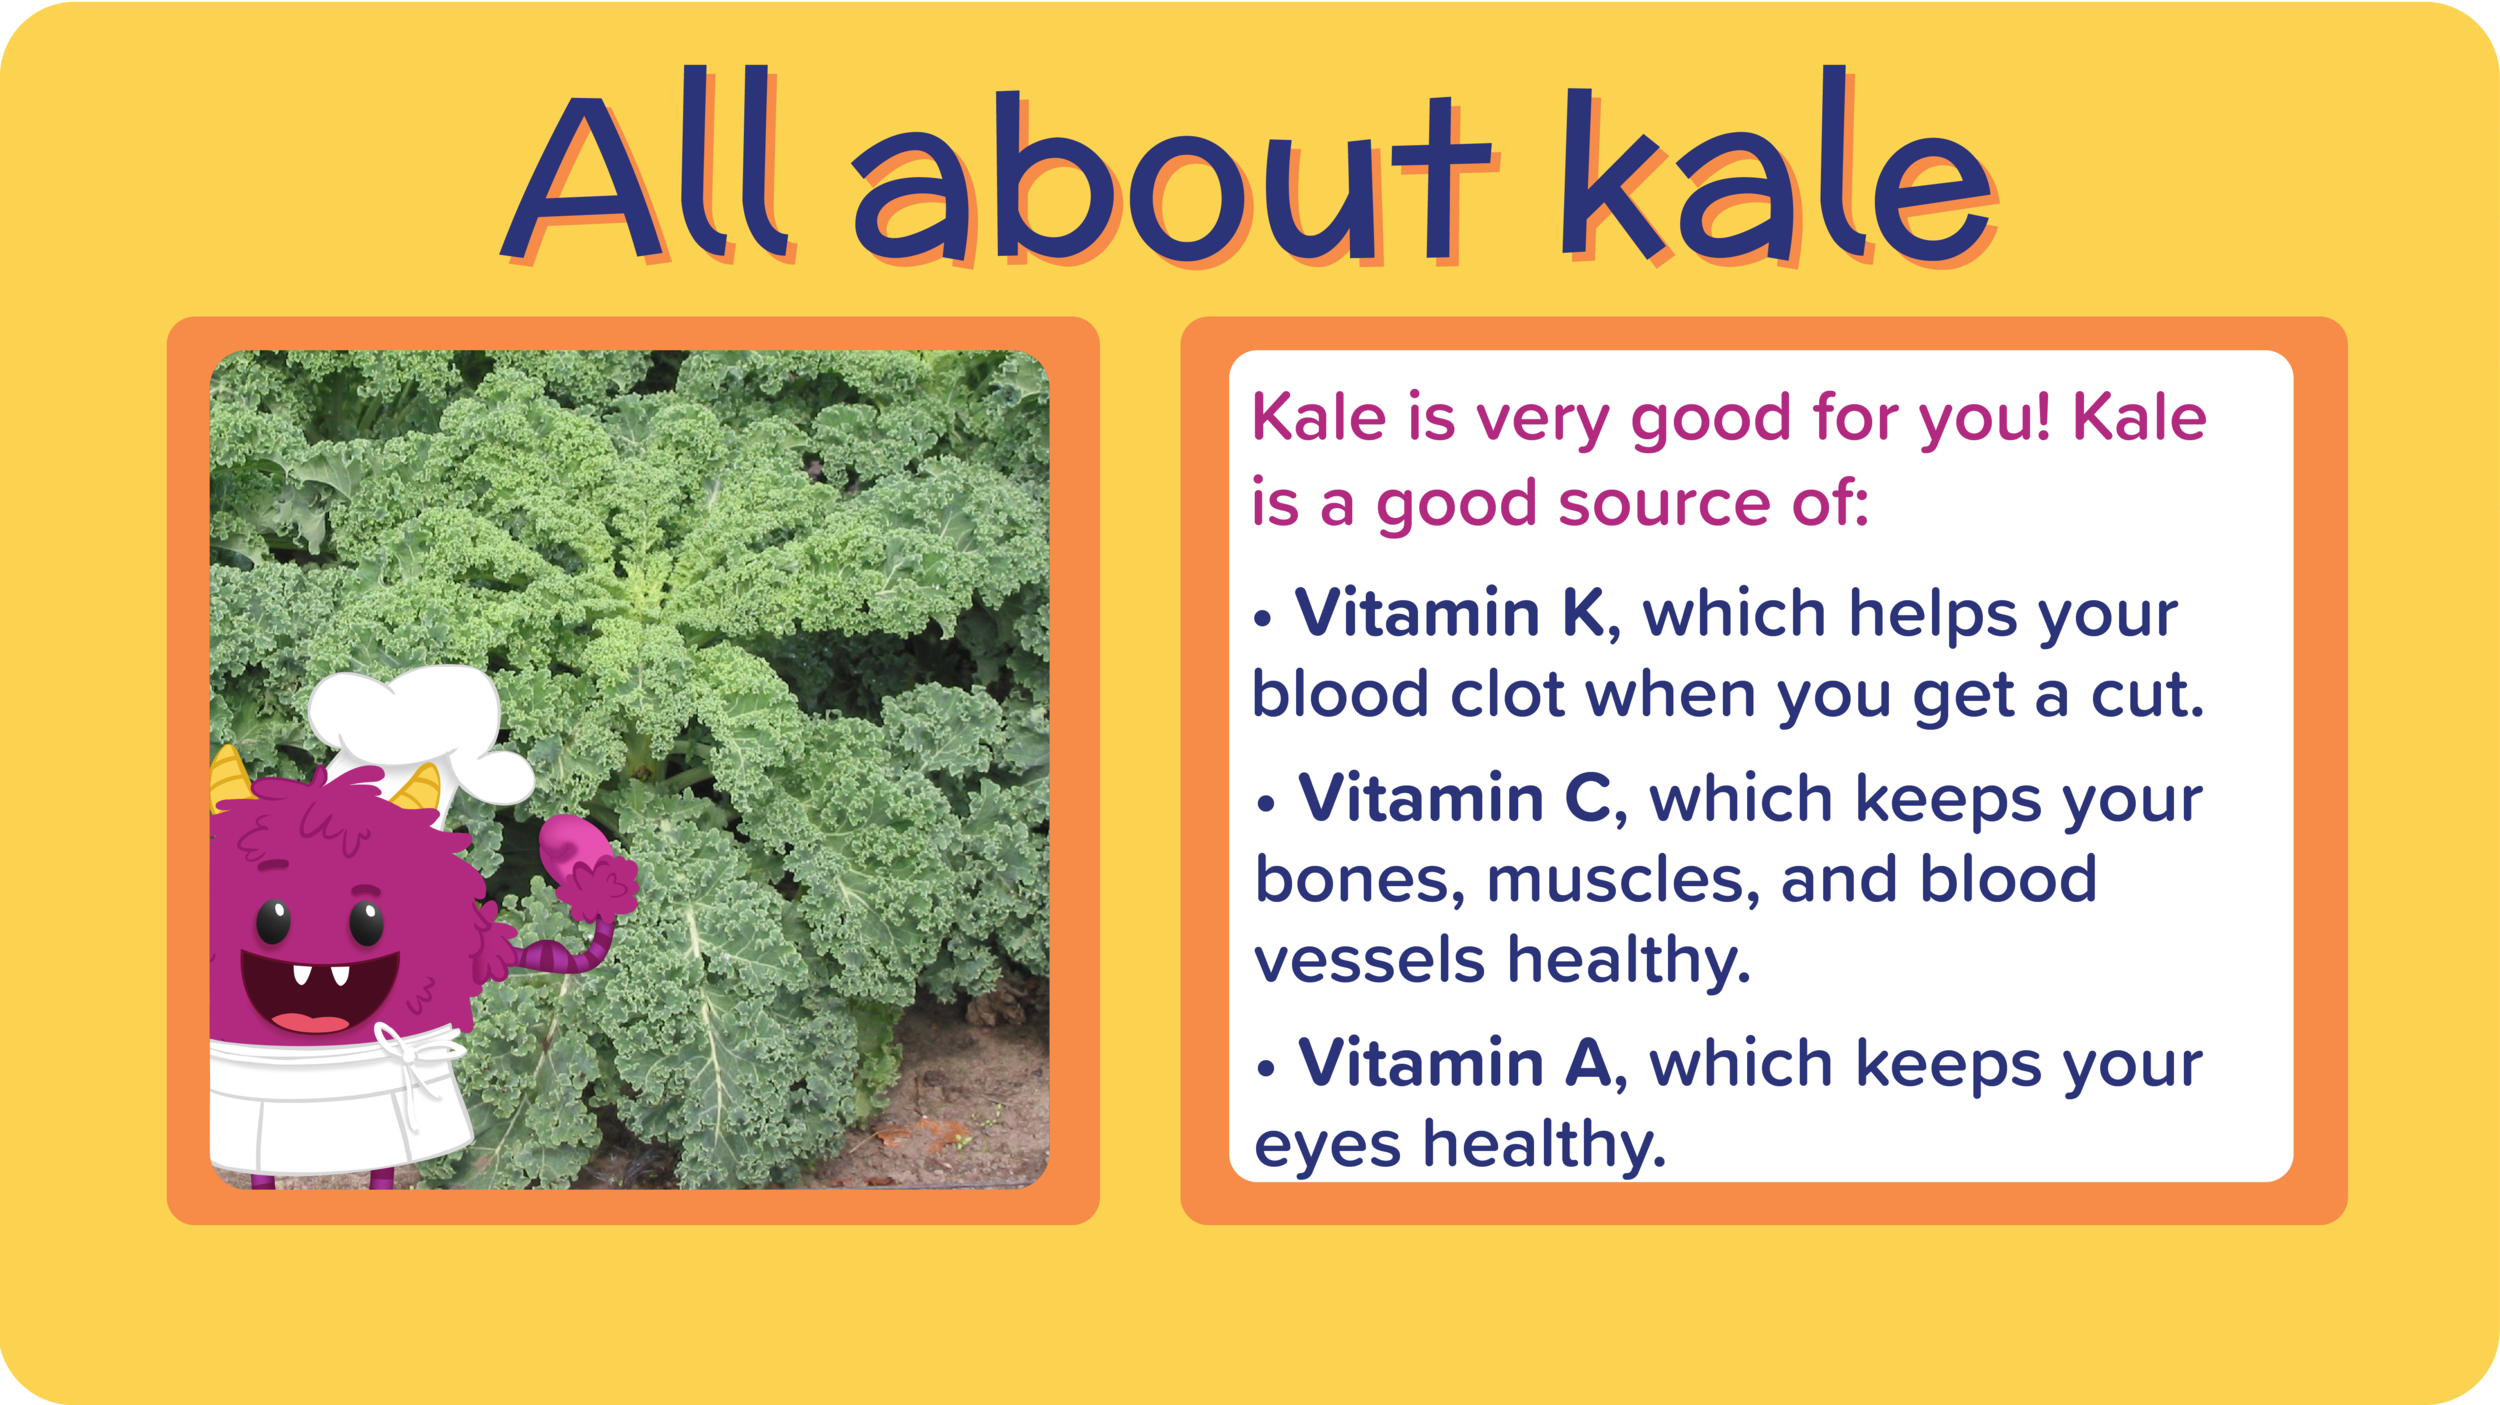 08_SpicyTacoKaleChips_about kale-01.png